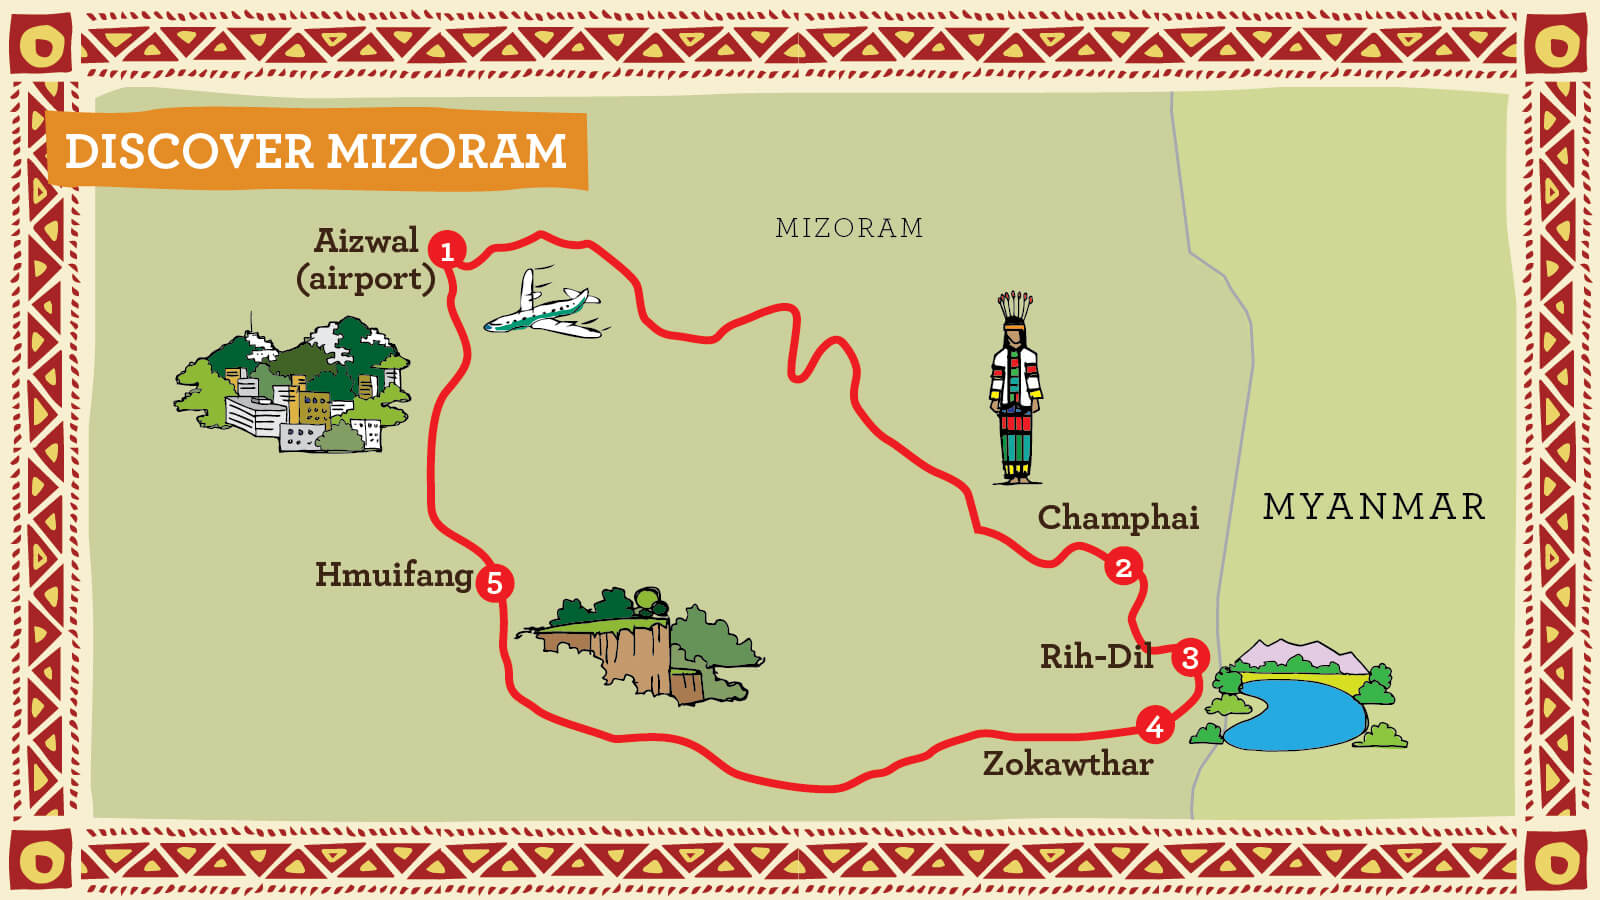 Illustrated Route Map - Mizoram Tour and Travel